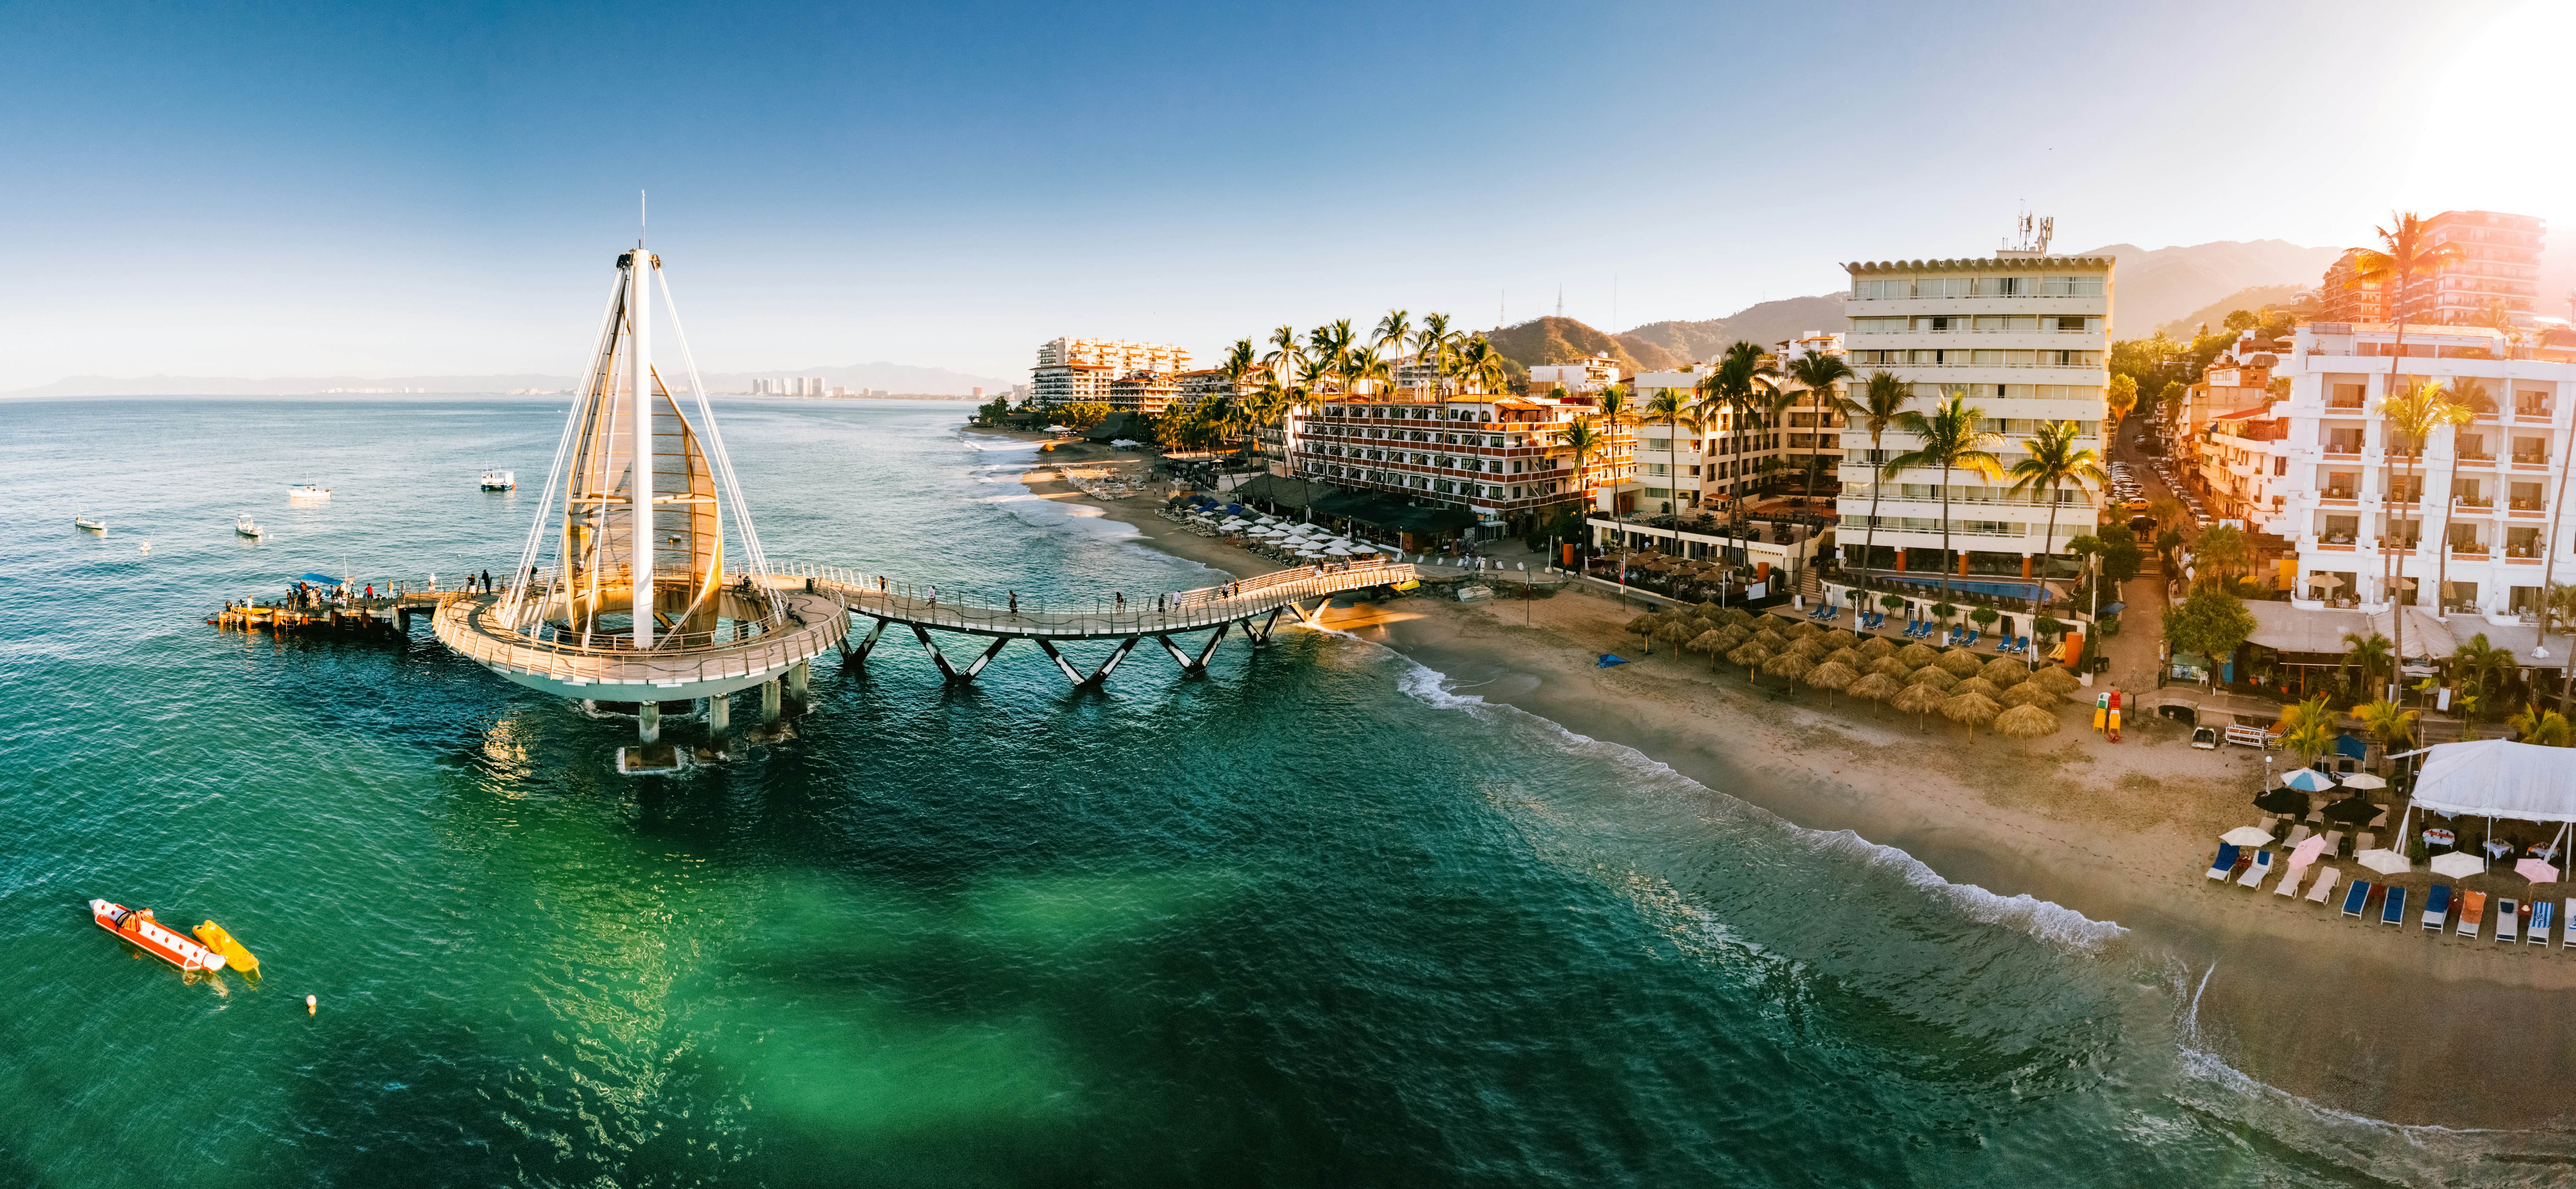 The Best Things You Can Do For Free In Puerto Vallarta Lonely Planet